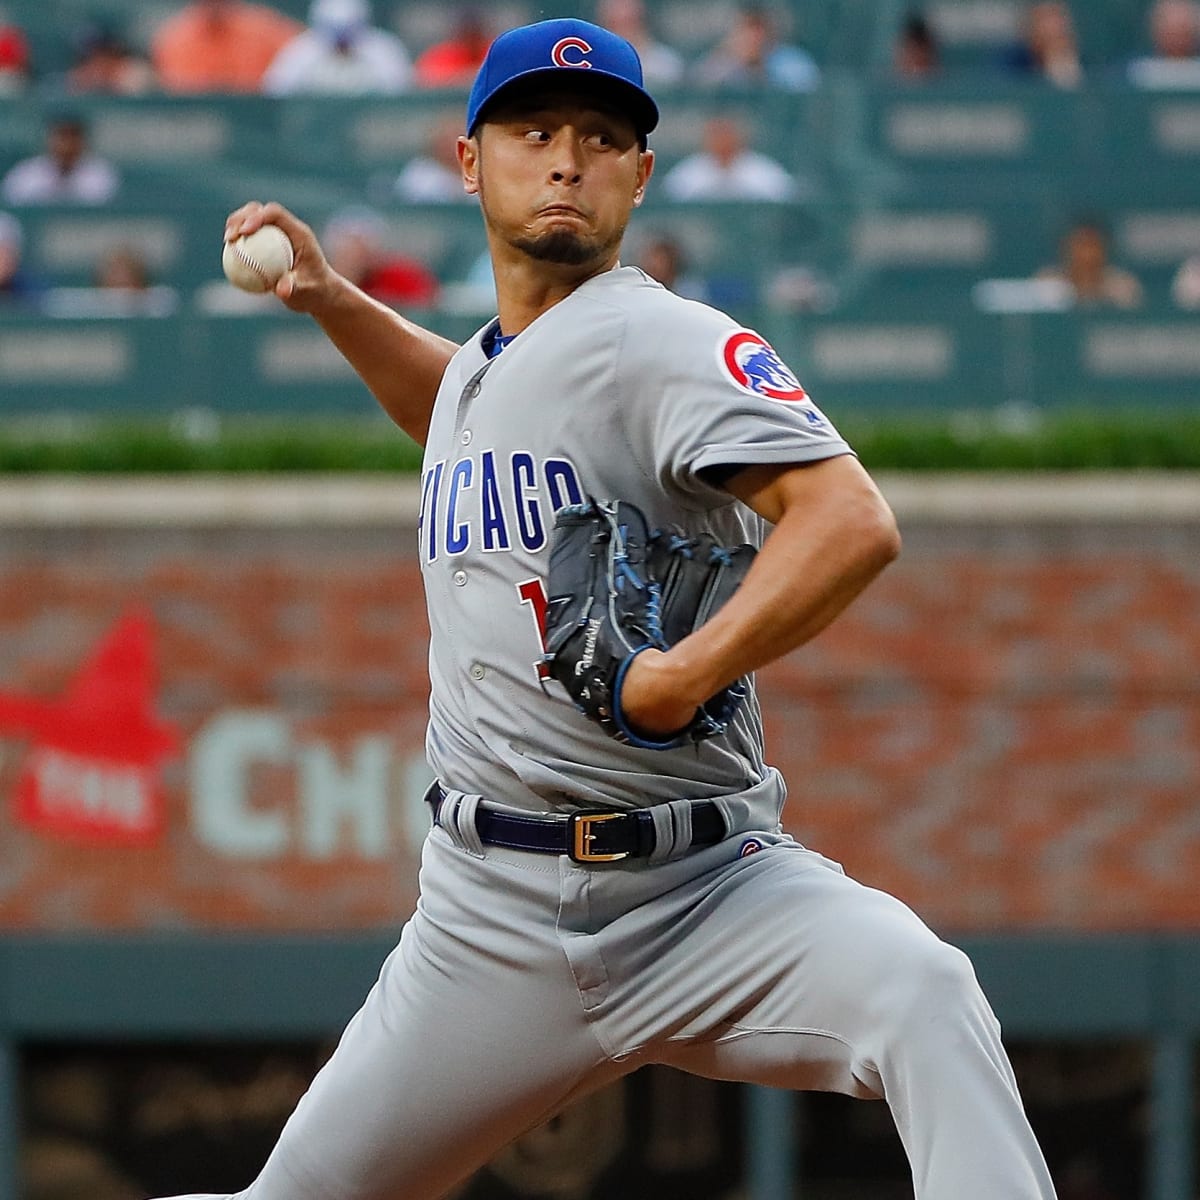 Yu Darvish leaves start early with shoulder discomfort